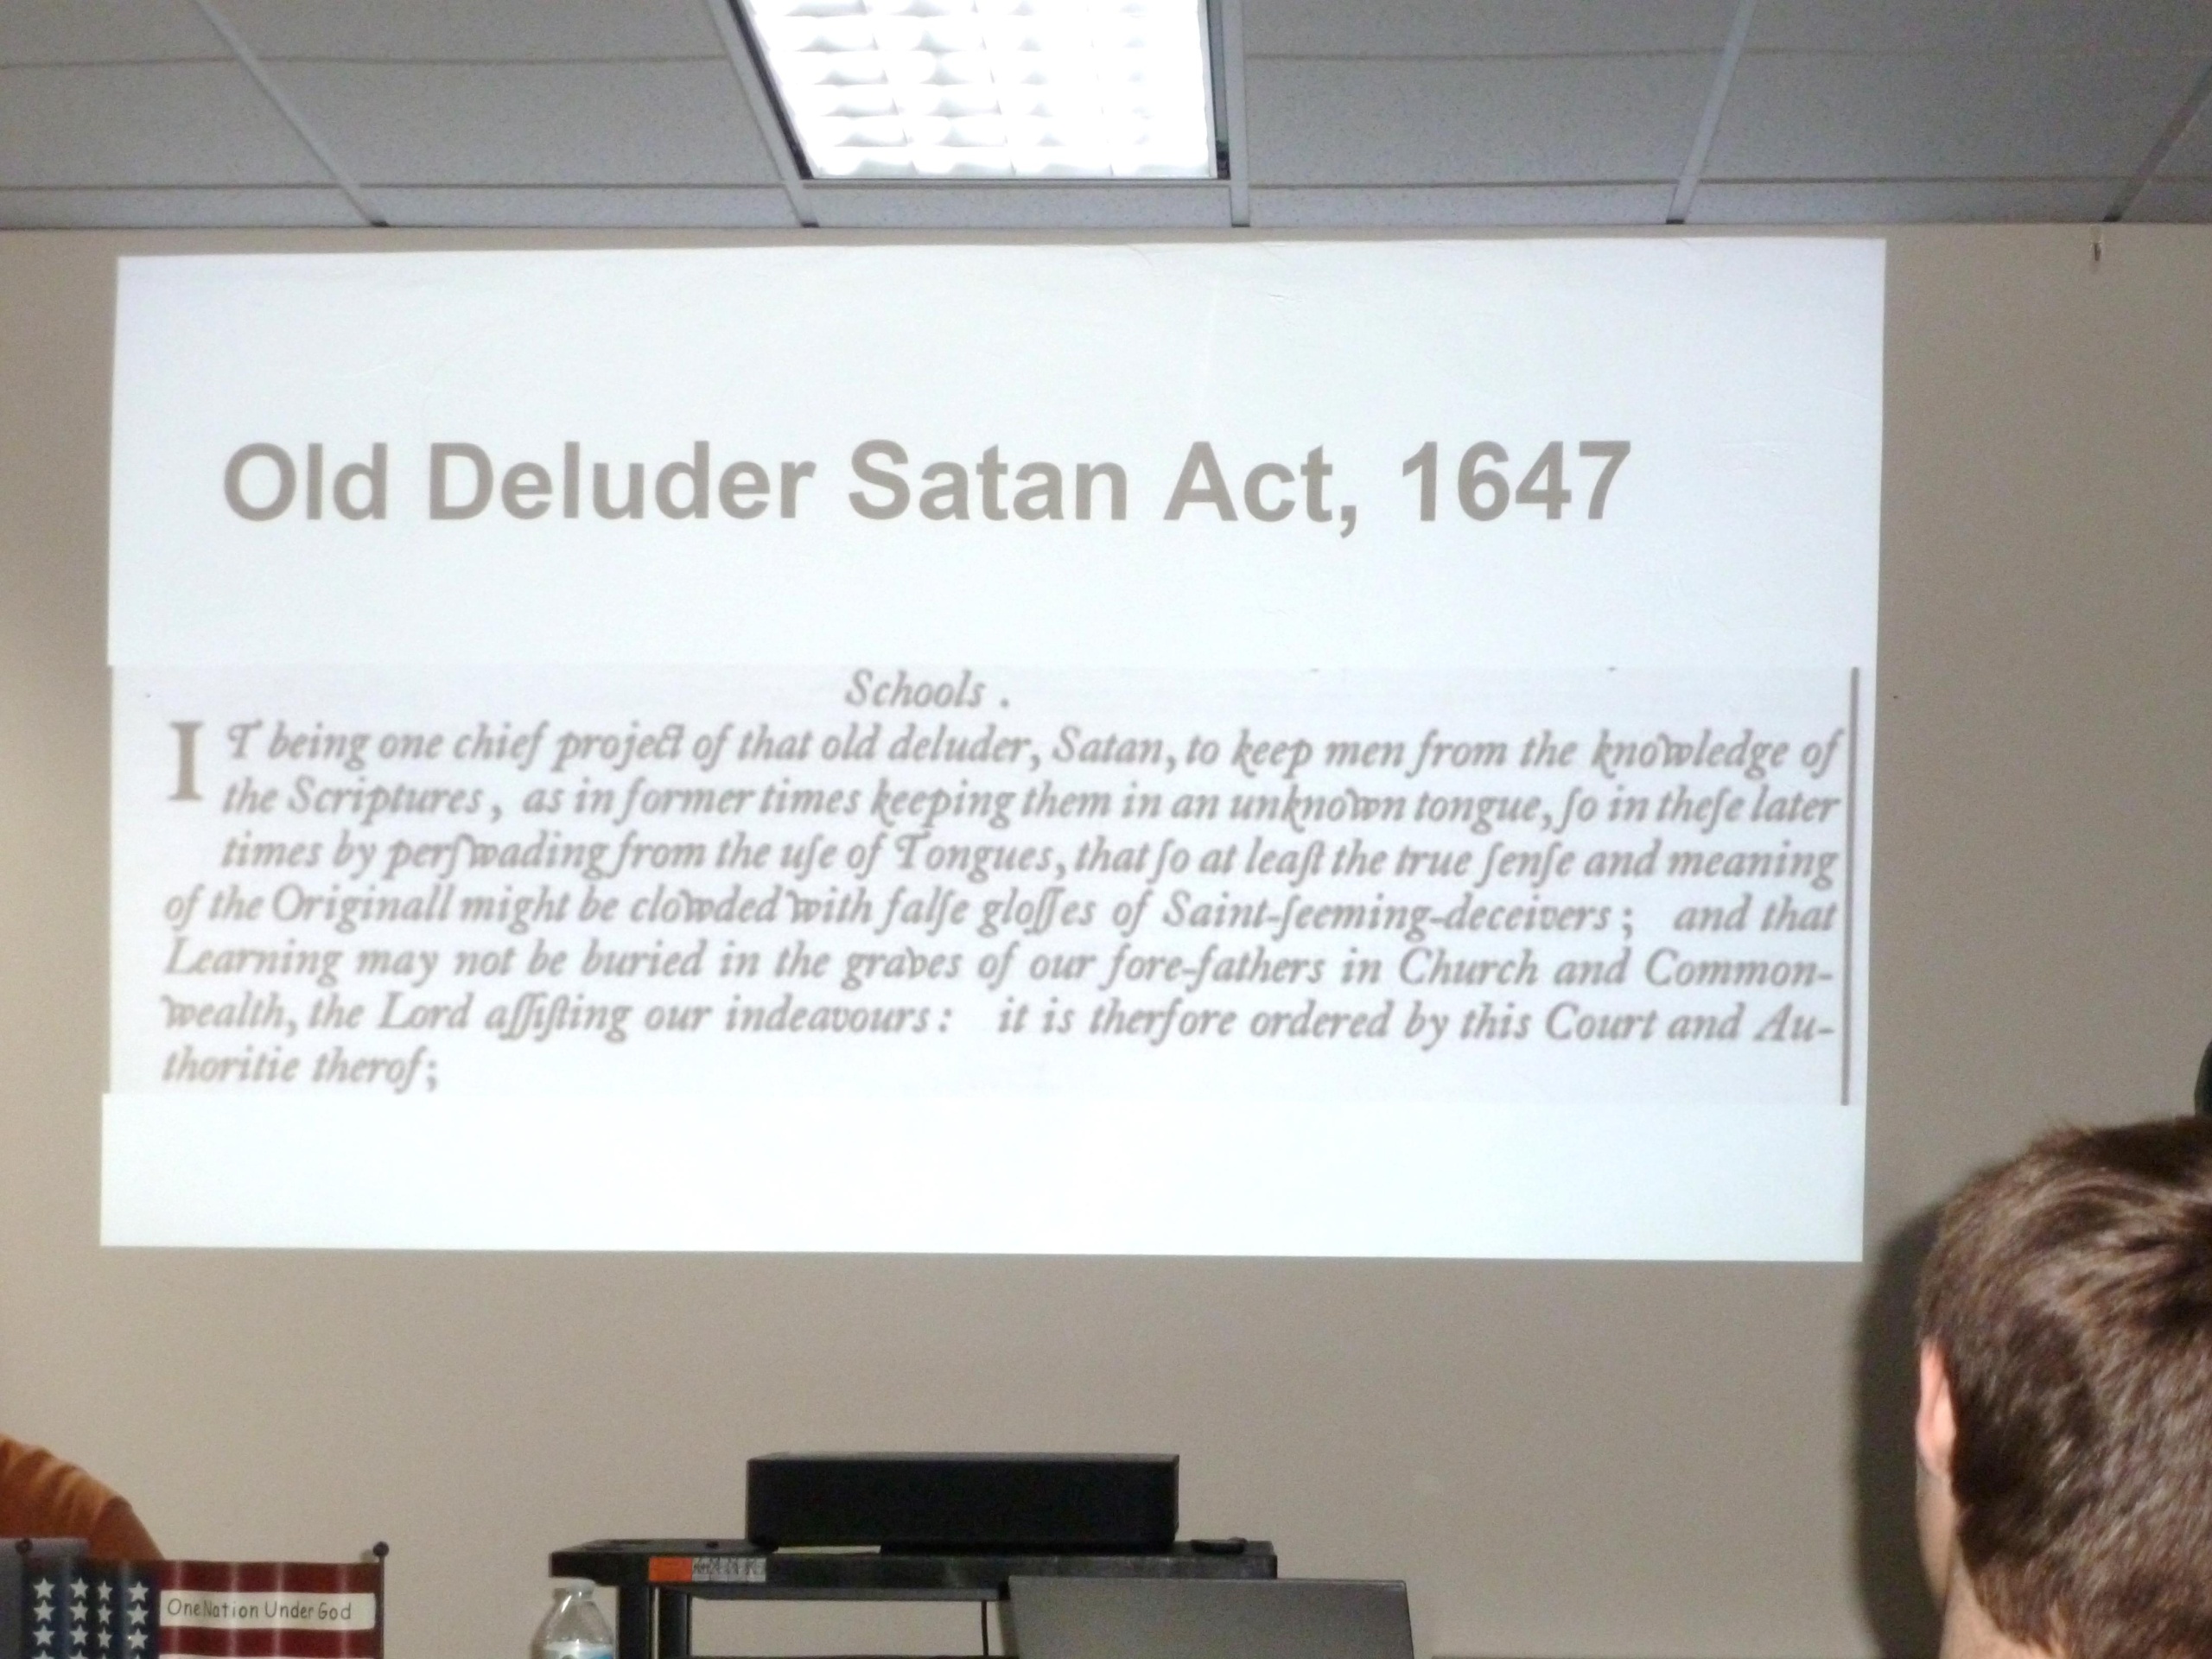 The Old Deluder Satan Act of 1647 explained the need for education from a Biblical perspective.